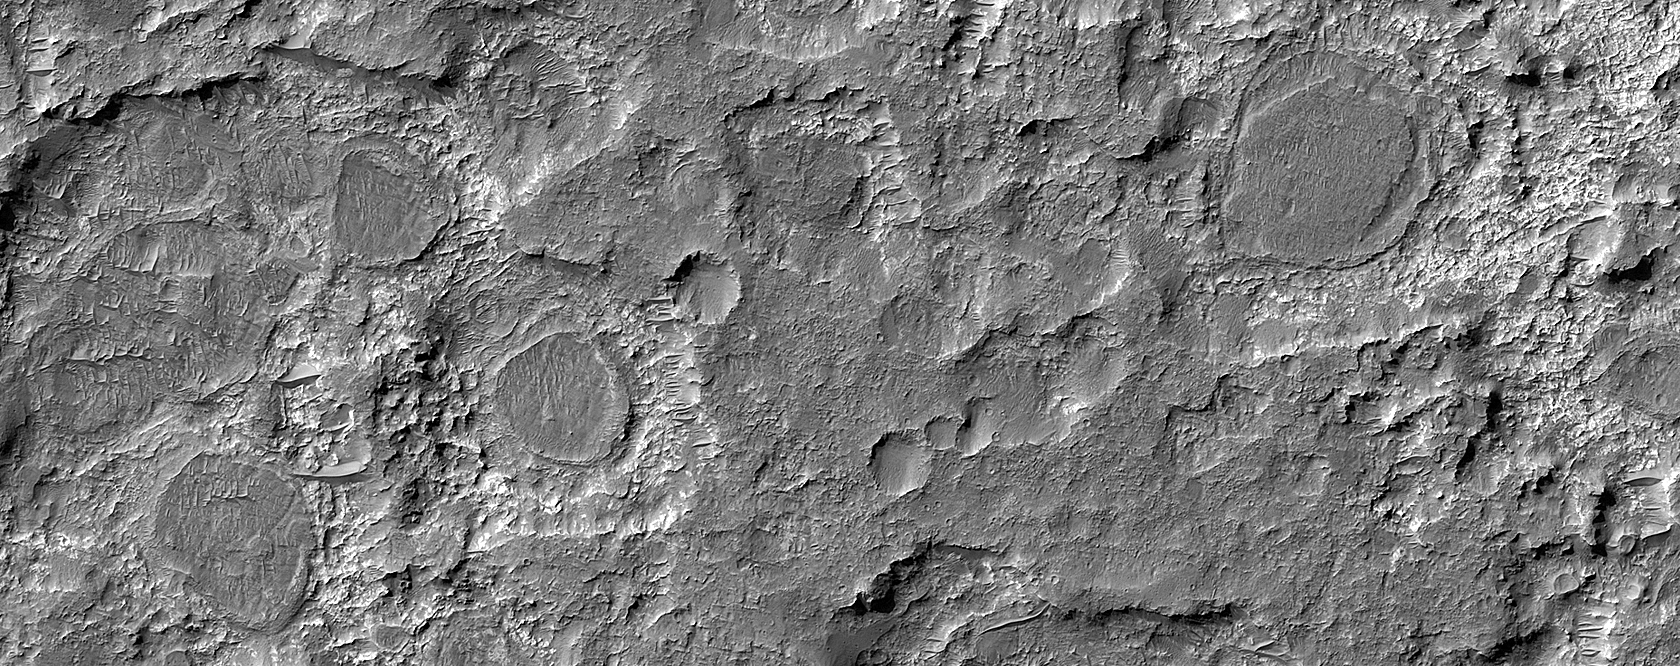 Dark Patches Formed by Craters